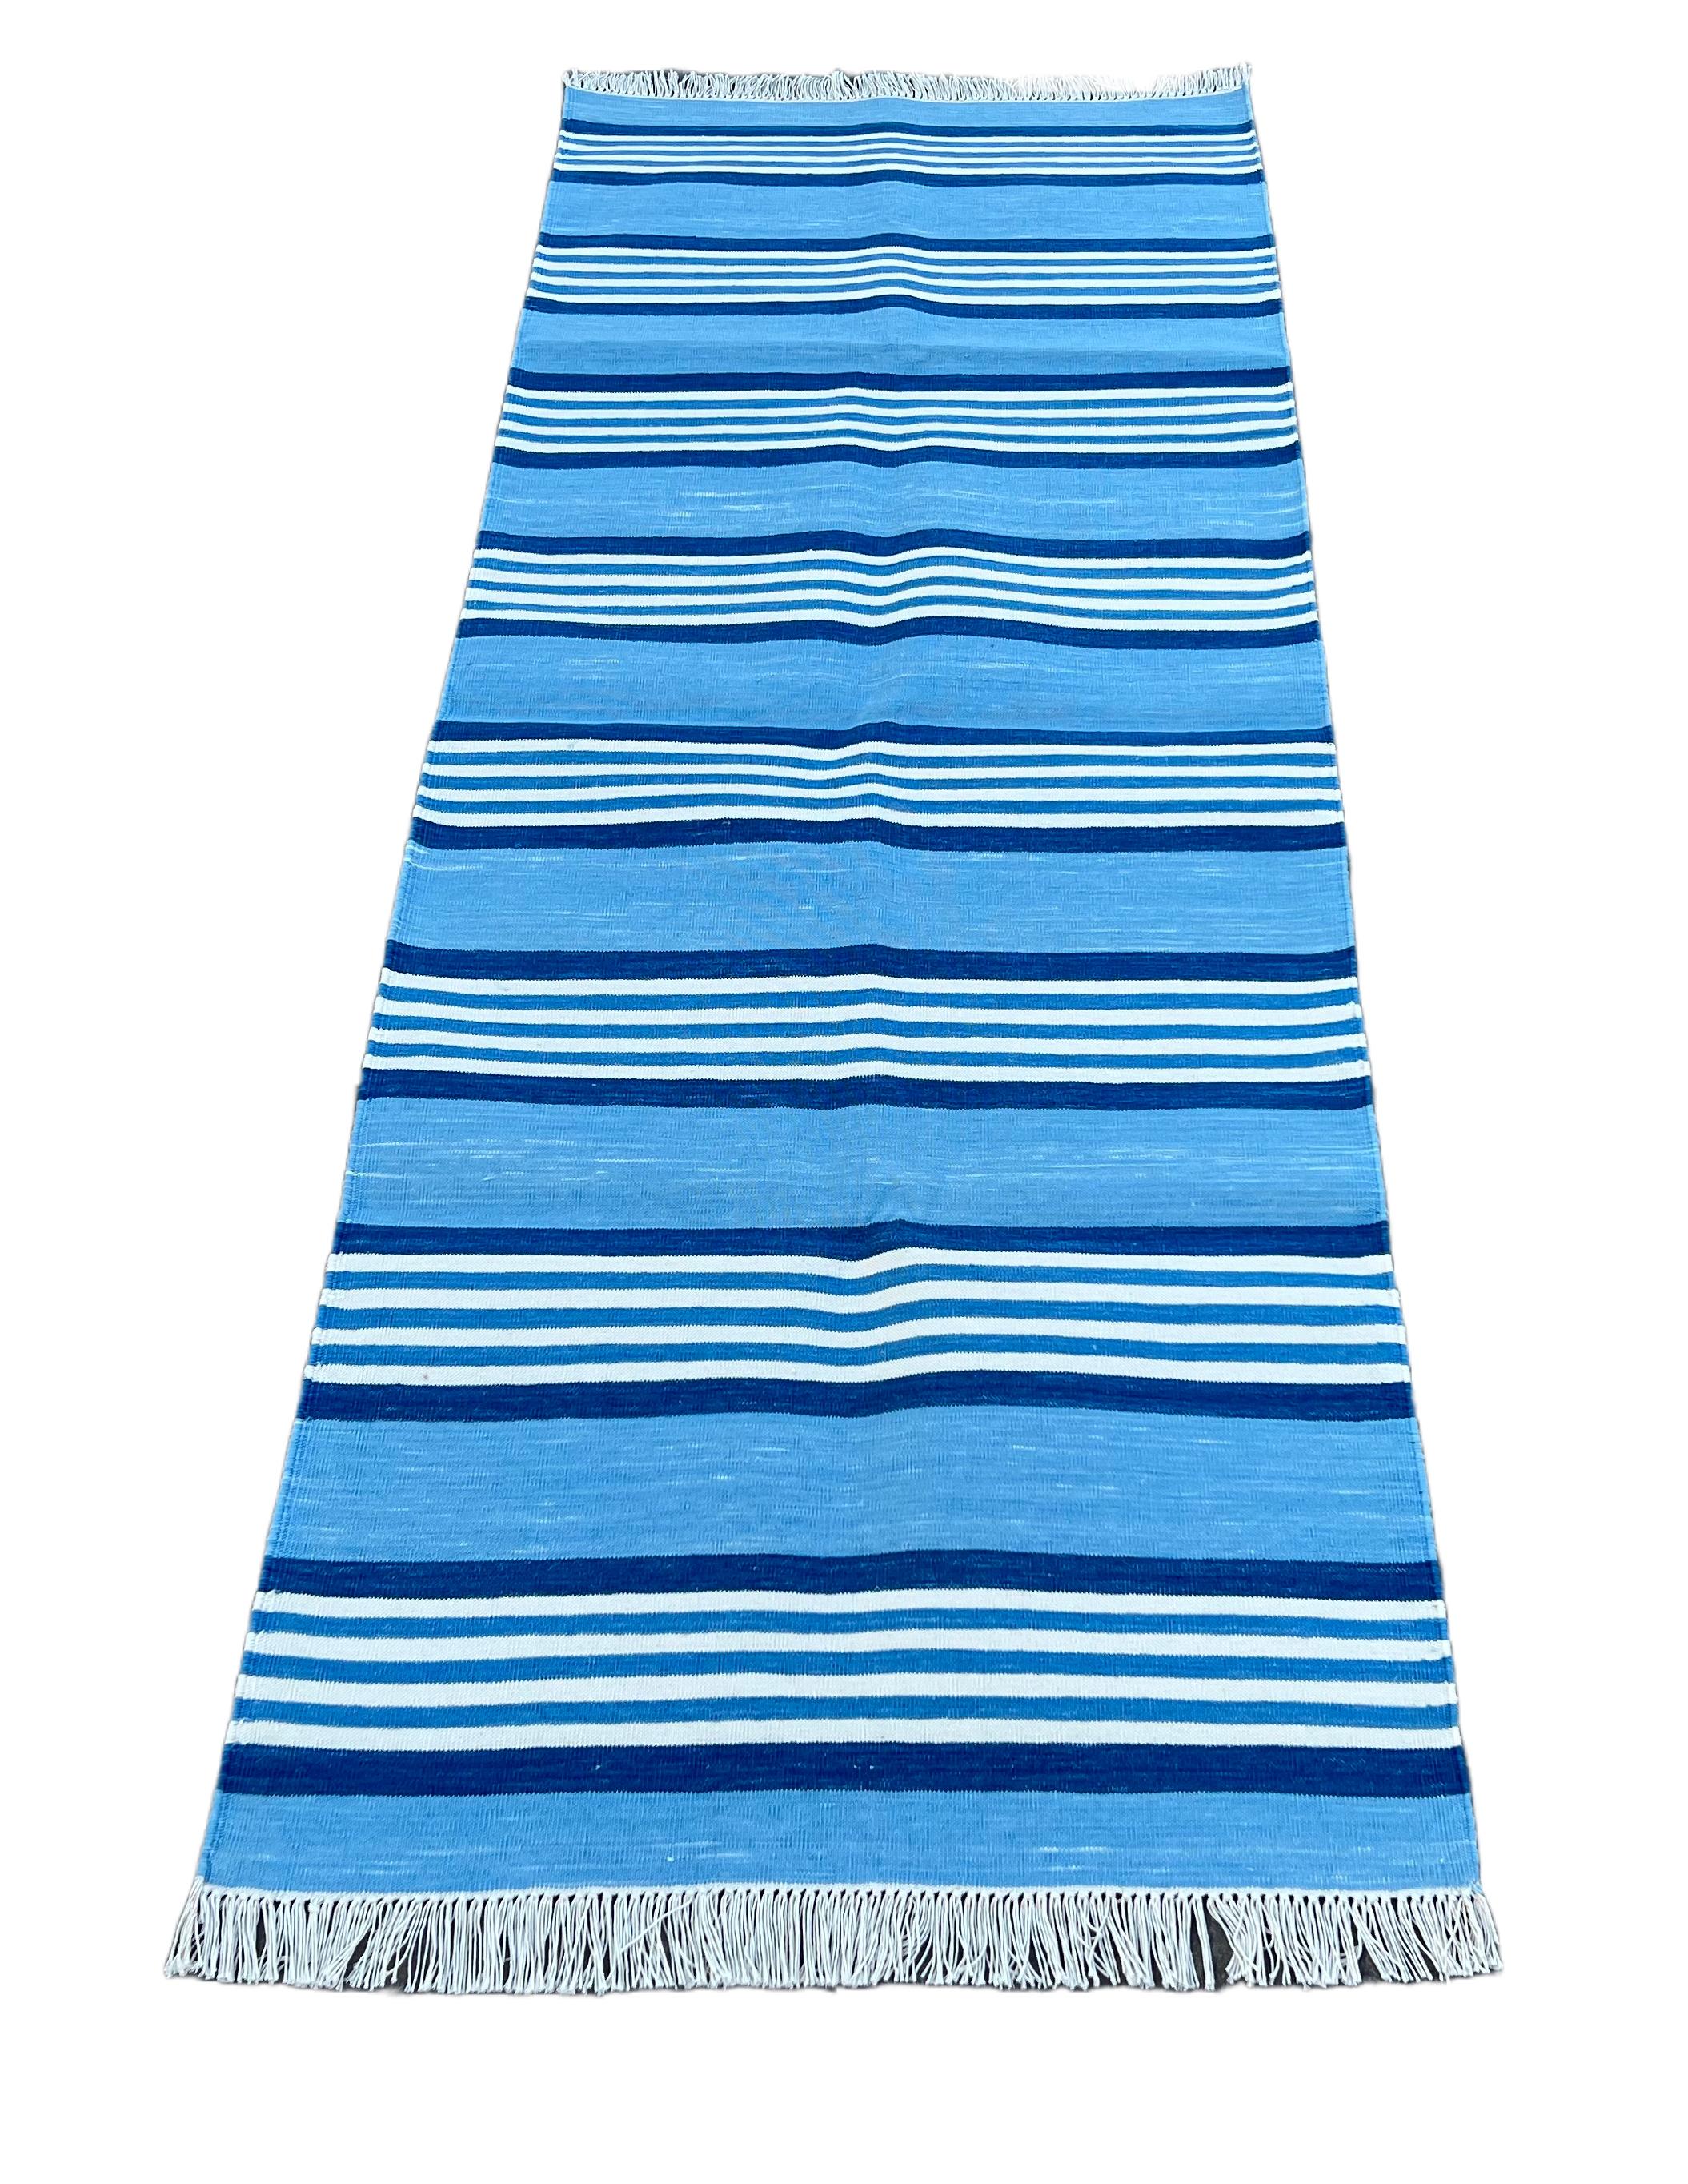 Contemporary Handmade Cotton Area Flat Weave Runner, 2x6 Green And Blue Stripe Indian Dhurrie For Sale